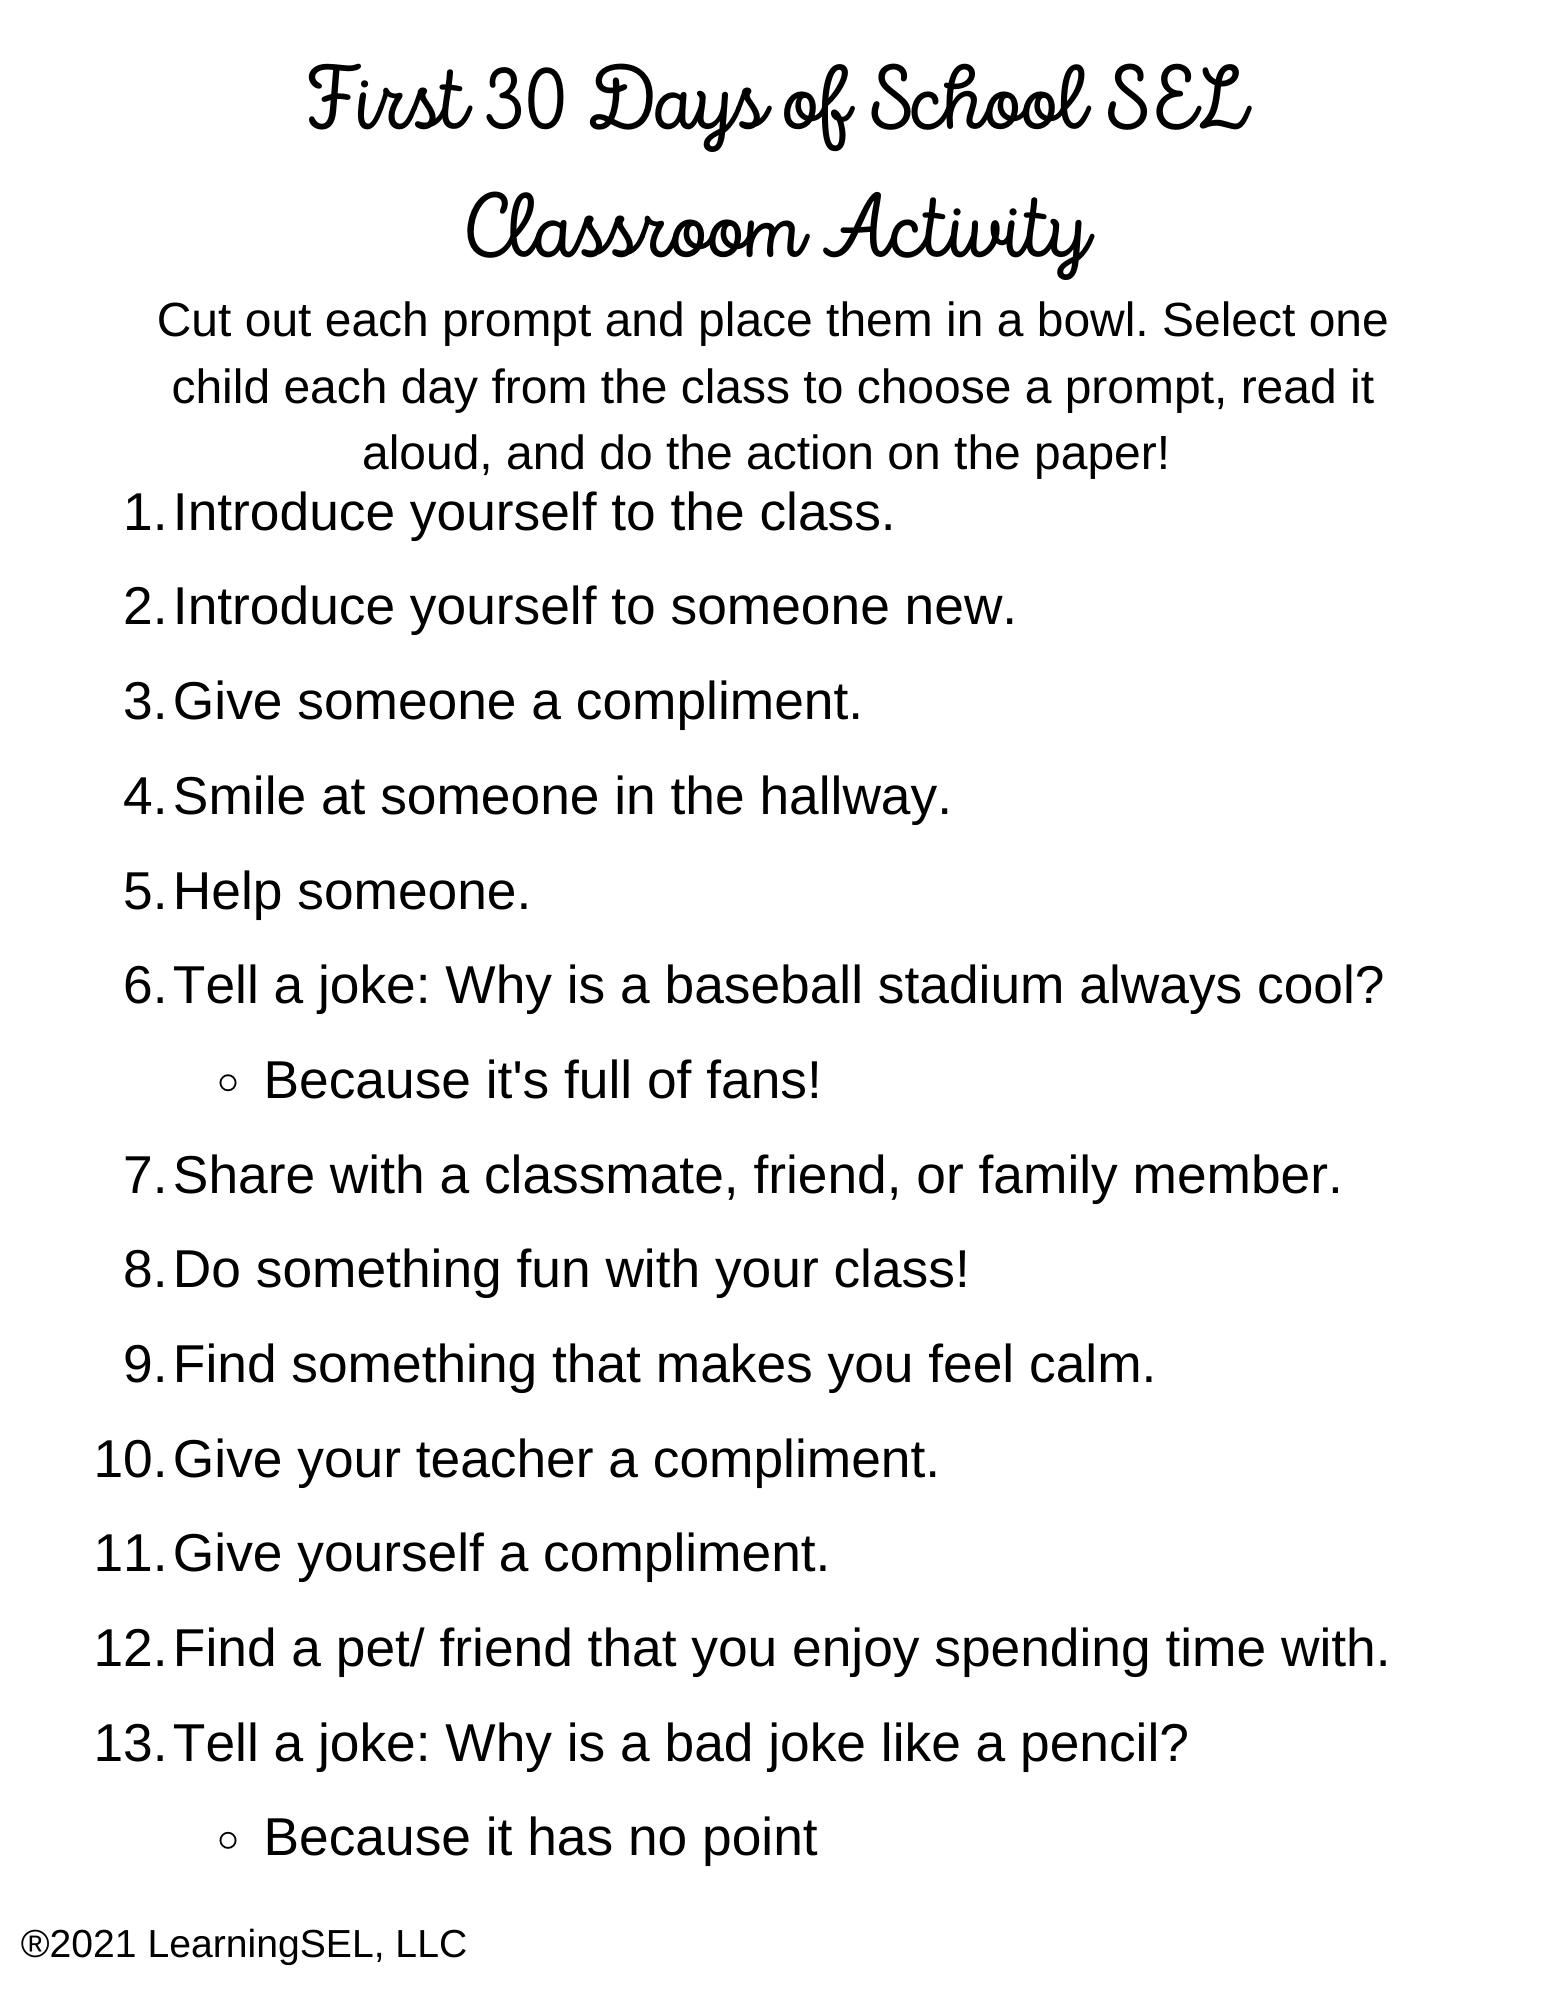 First 30 Days of School SEL Classroom Activity (2)